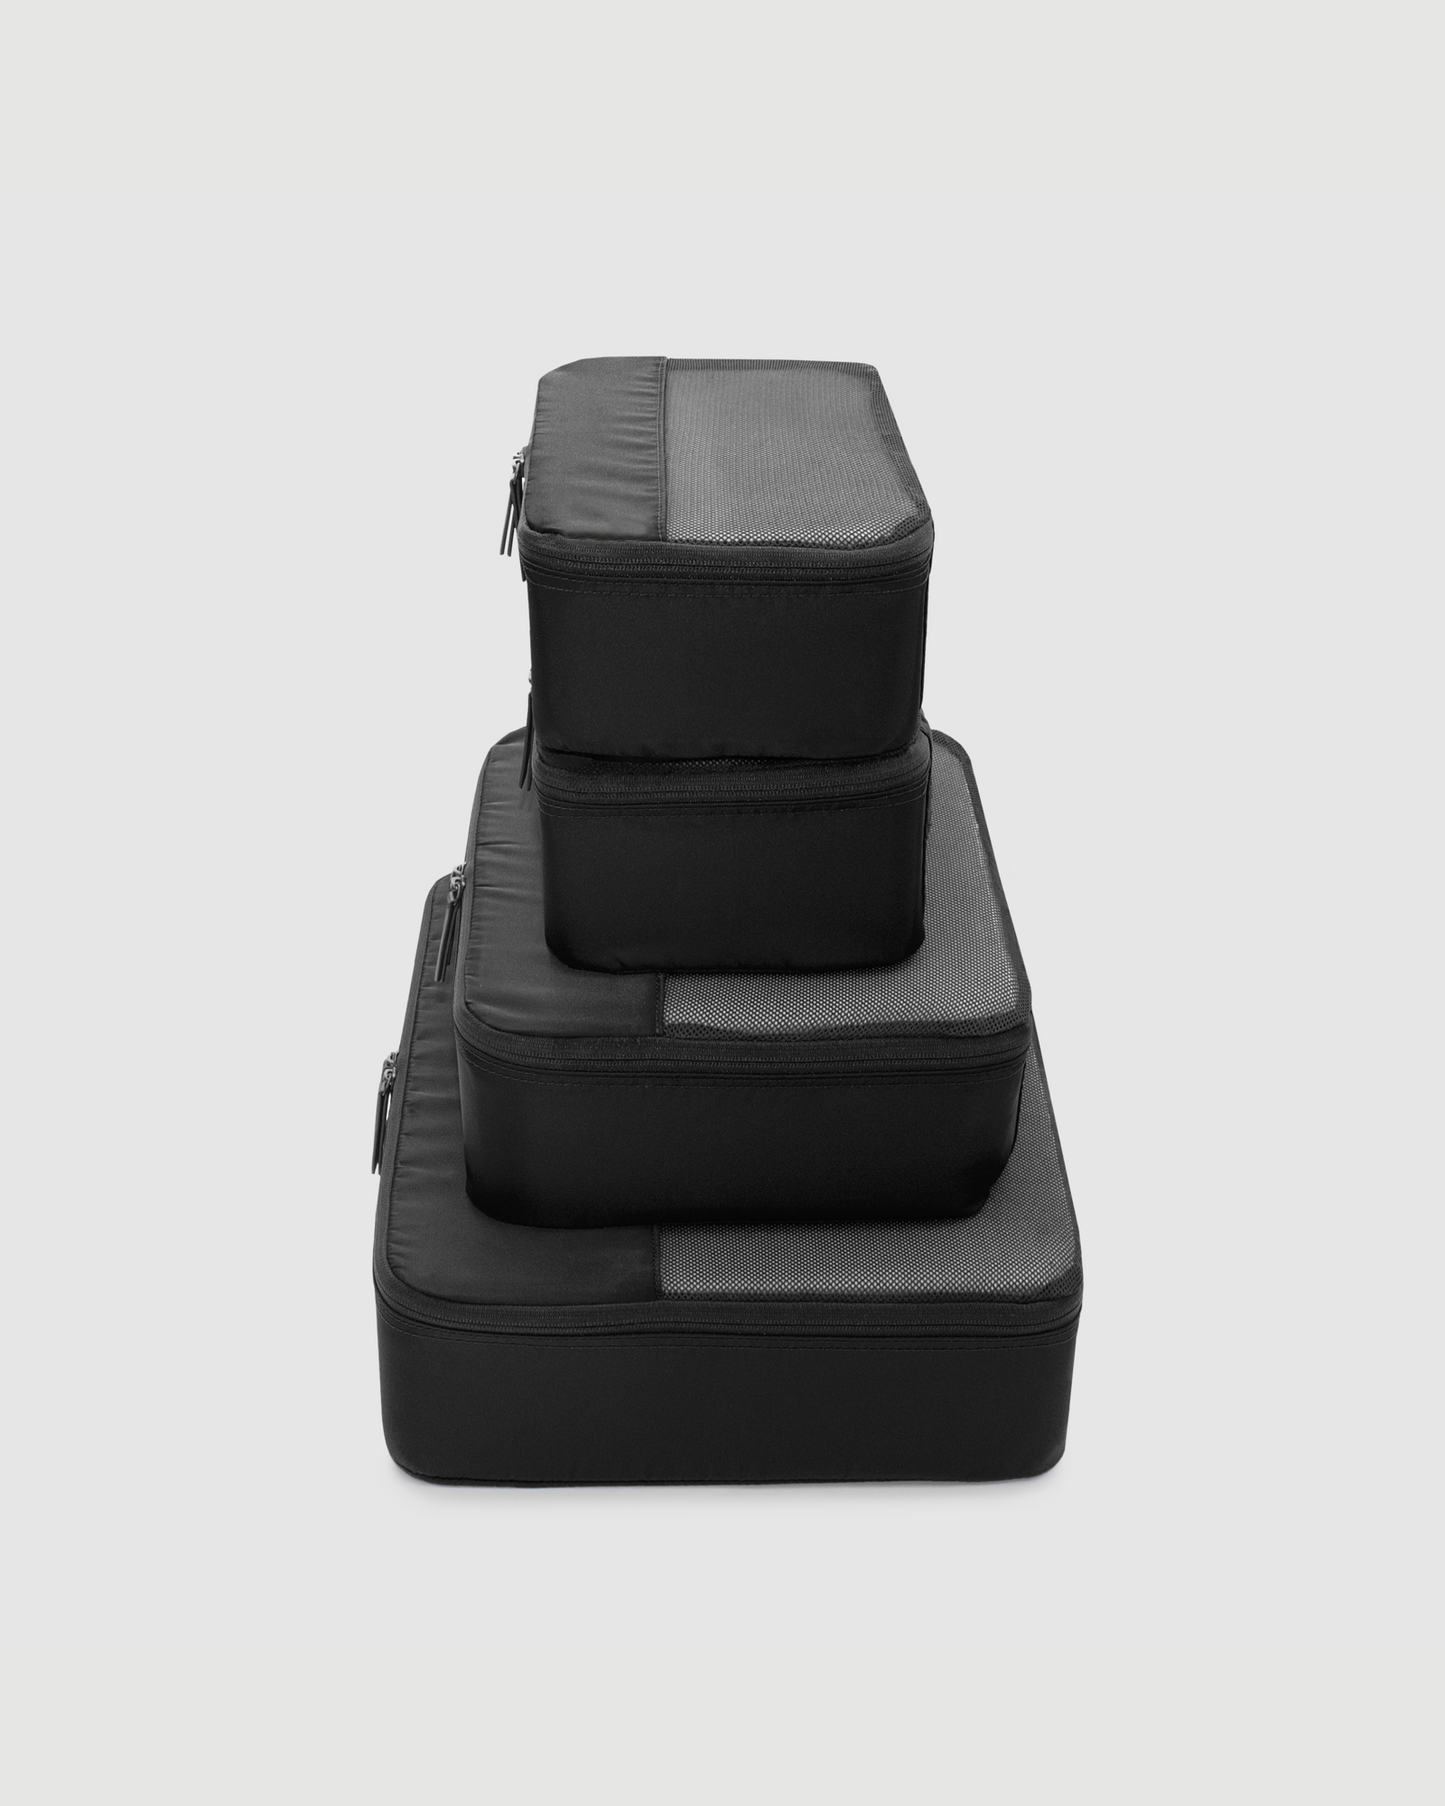 Nero 4 Piece Packing Cube